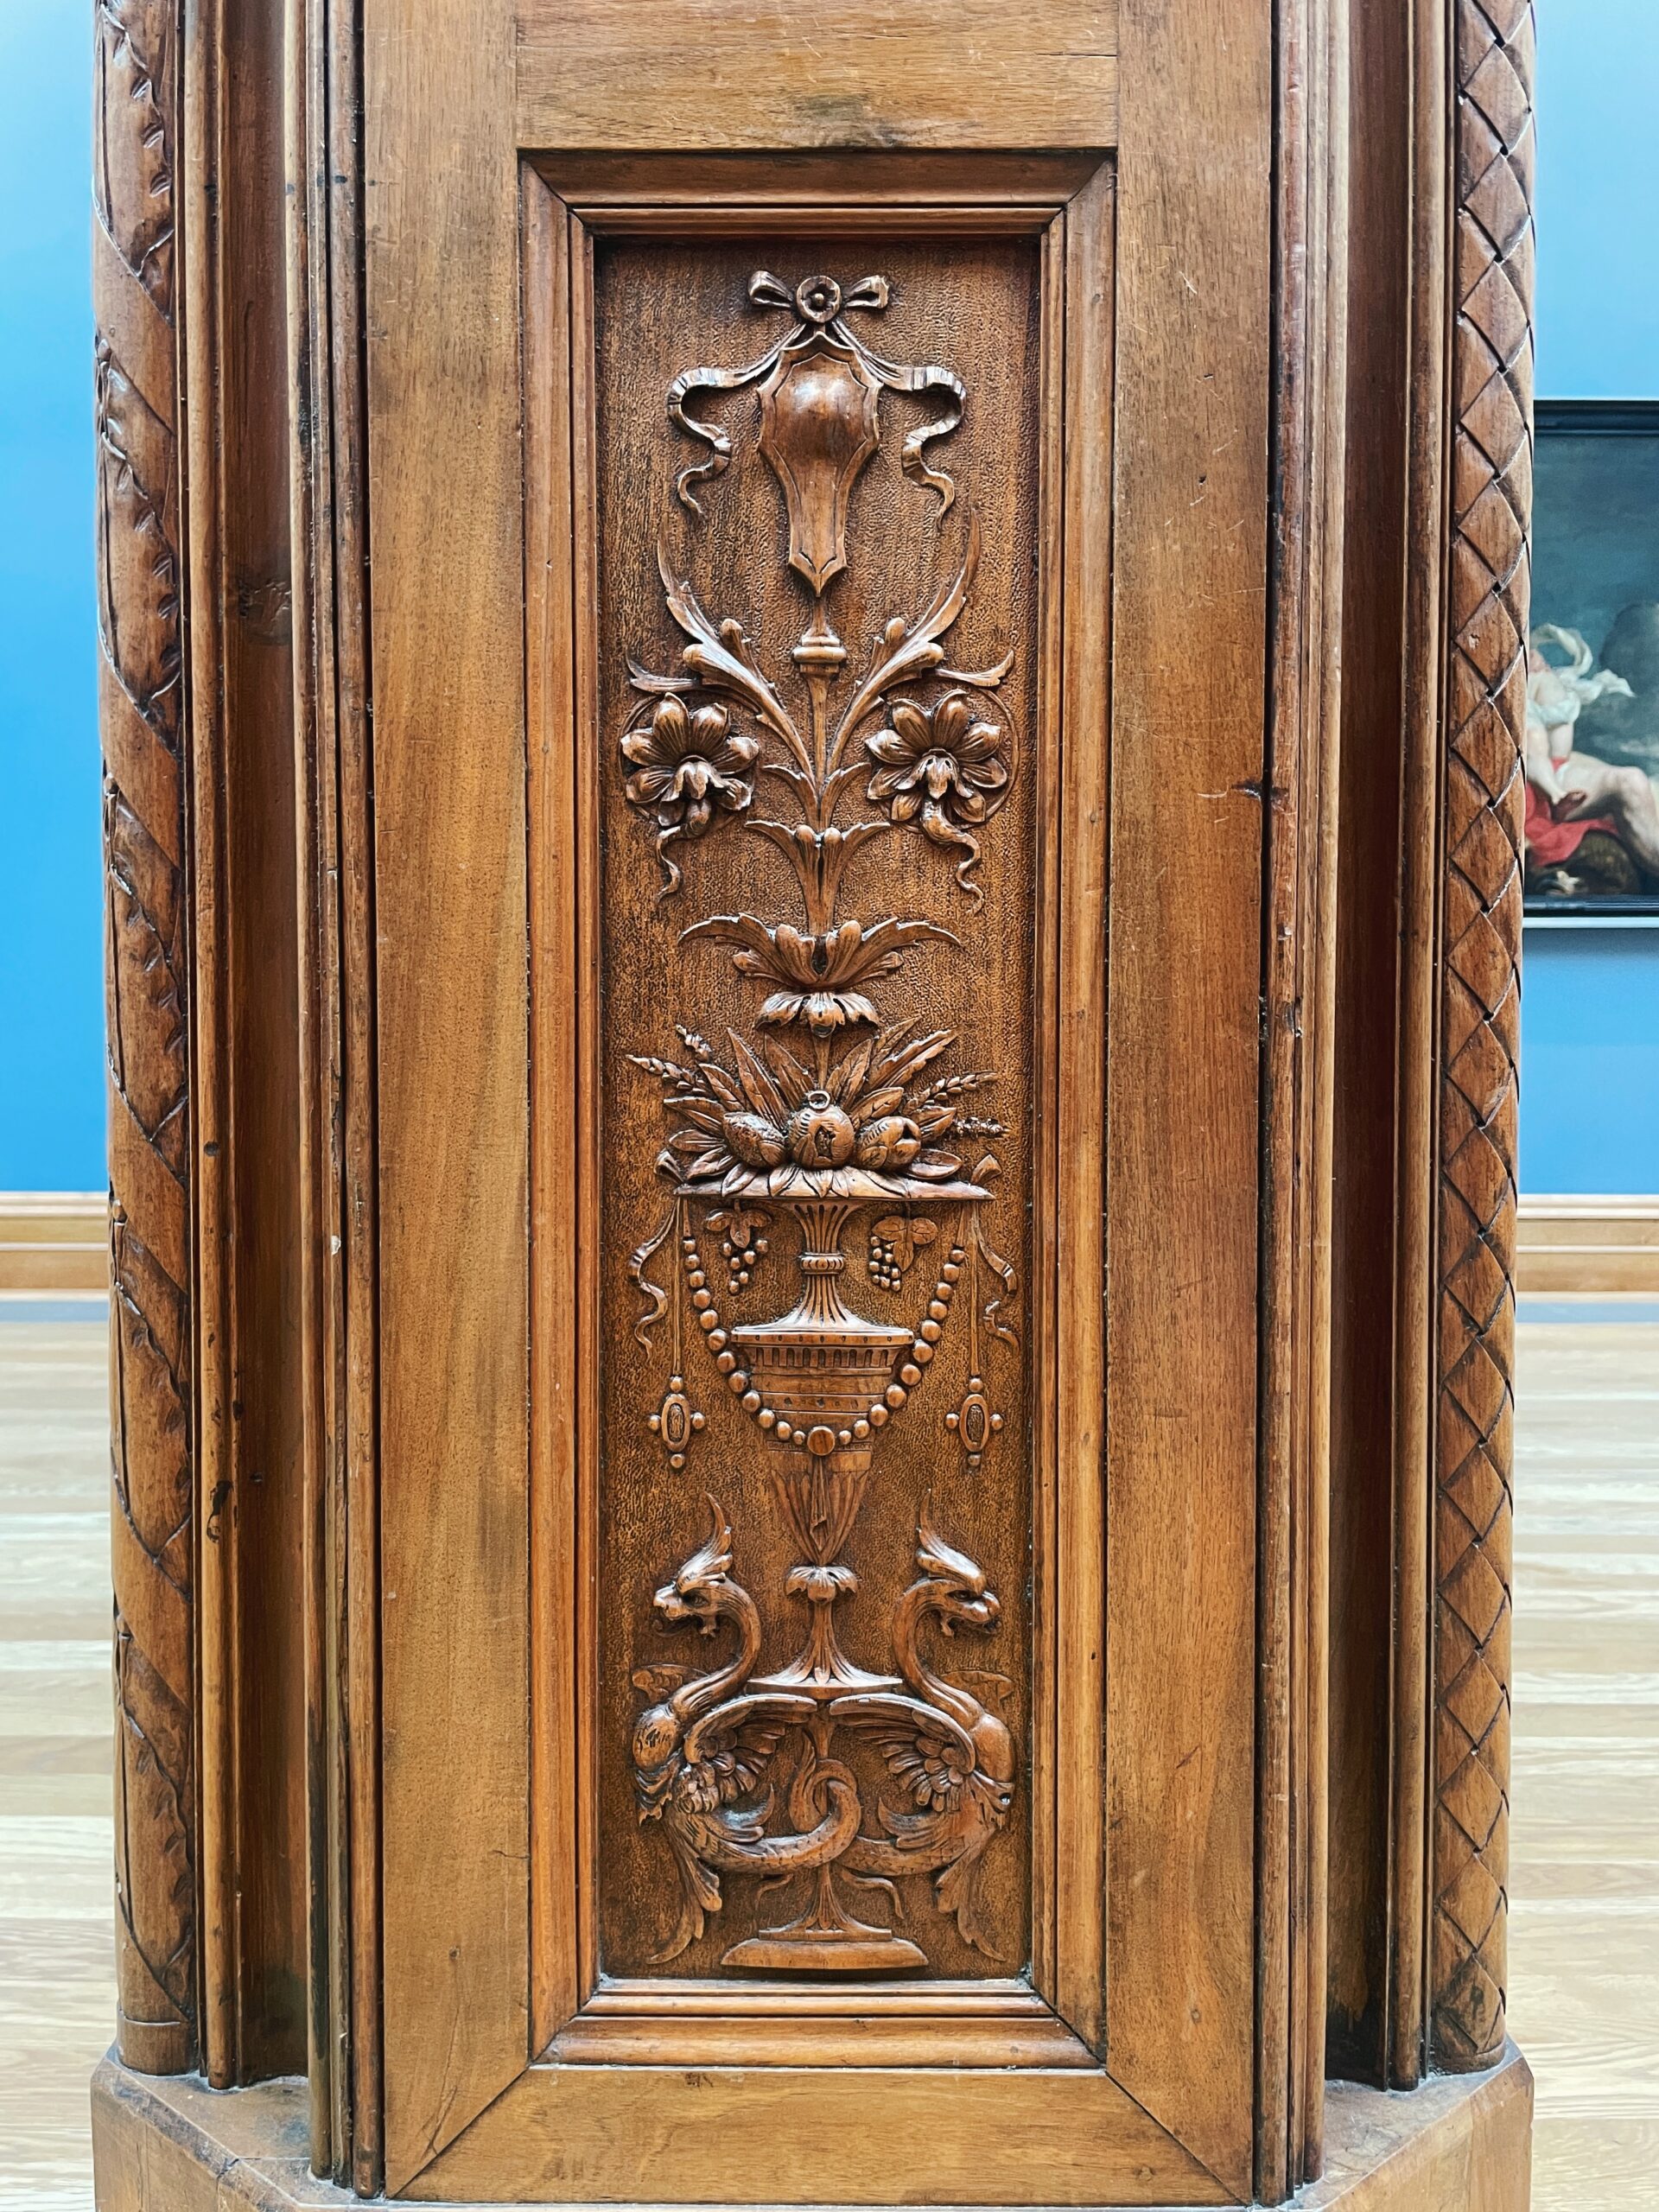 Carved doorframe with a bird on top and various flowers and vases underneath